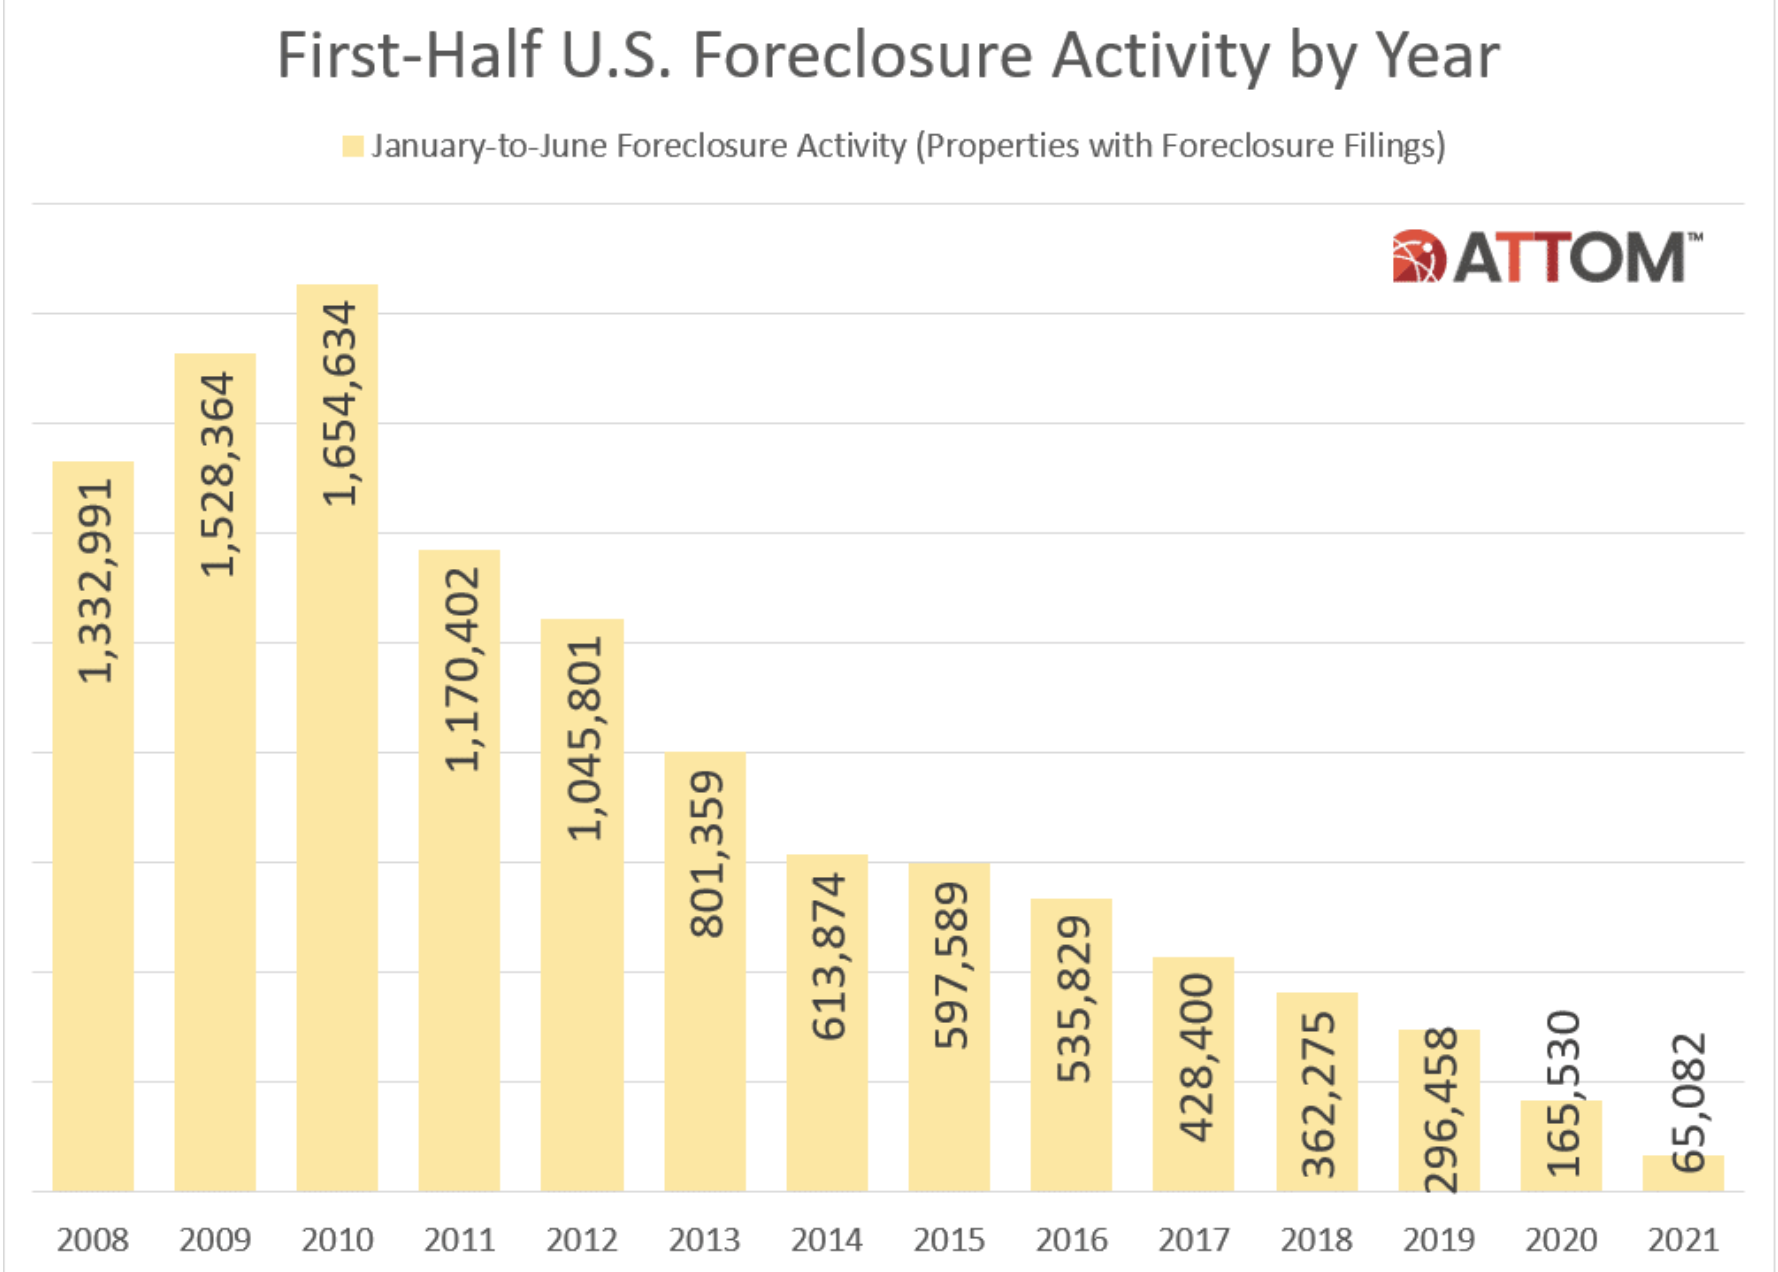 Foreclosure Activity at All-Time Low